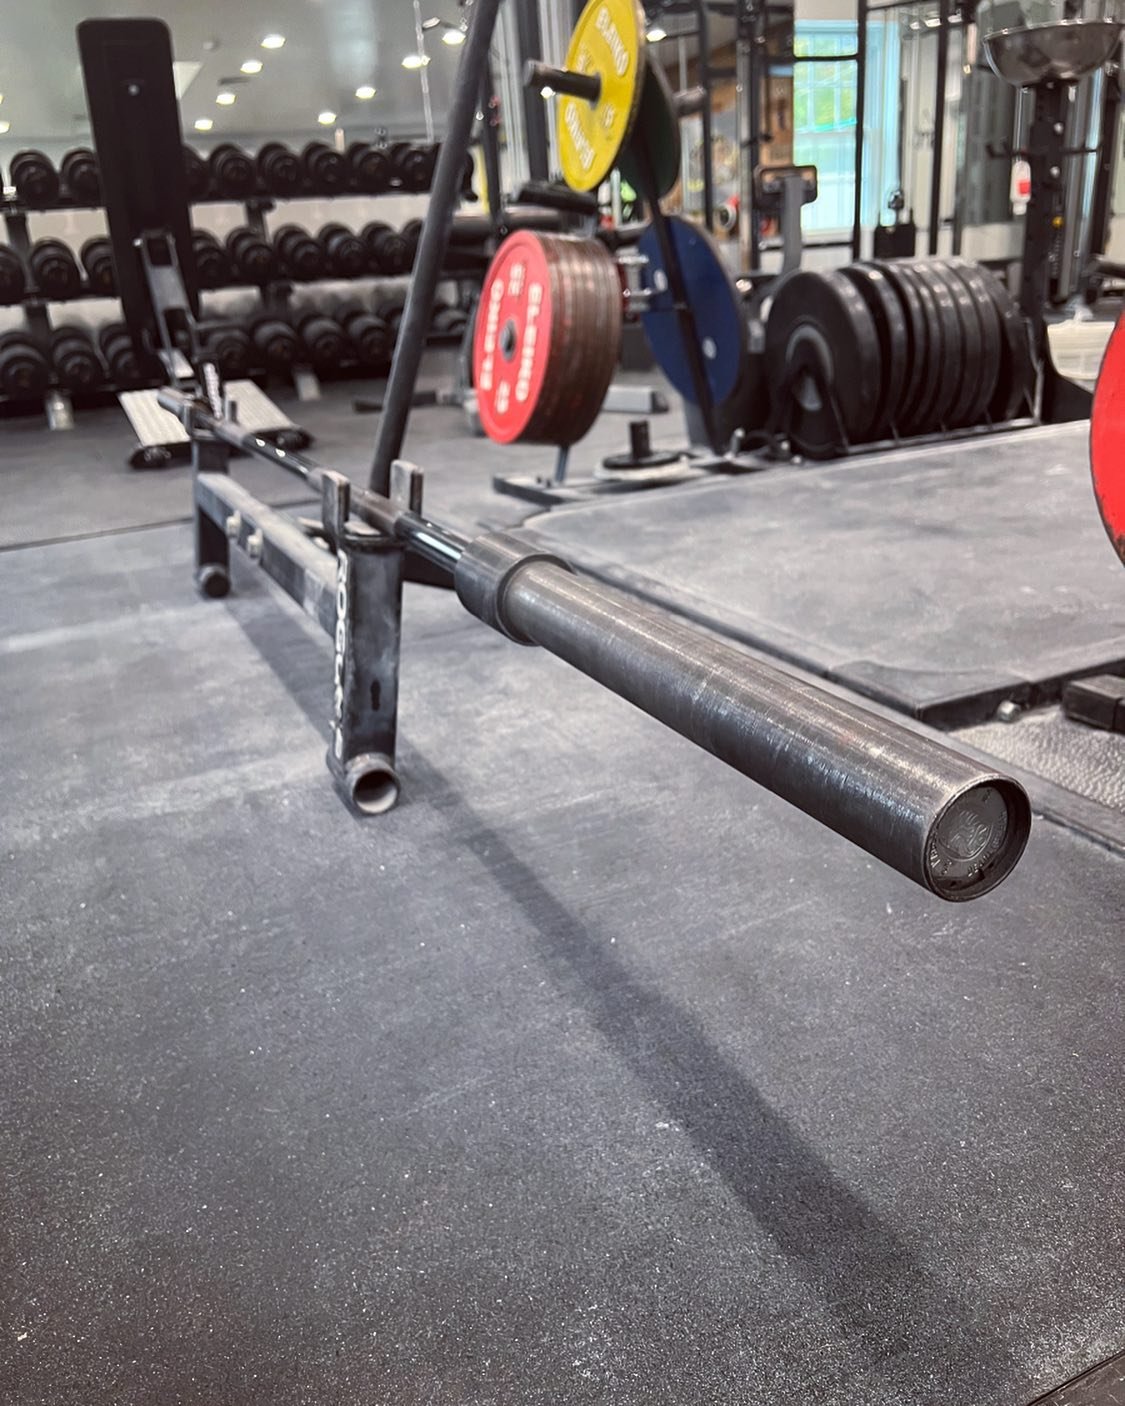 ‼️ The Kabuki deadlift bar is now available for members and guests to use here at SMG!

‼️ We just ask (along with all of our bars) that you PLEASE clean it and hang it back up when you&rsquo;re done. Uncleaned chalk ruins bars. 

ENJOY!